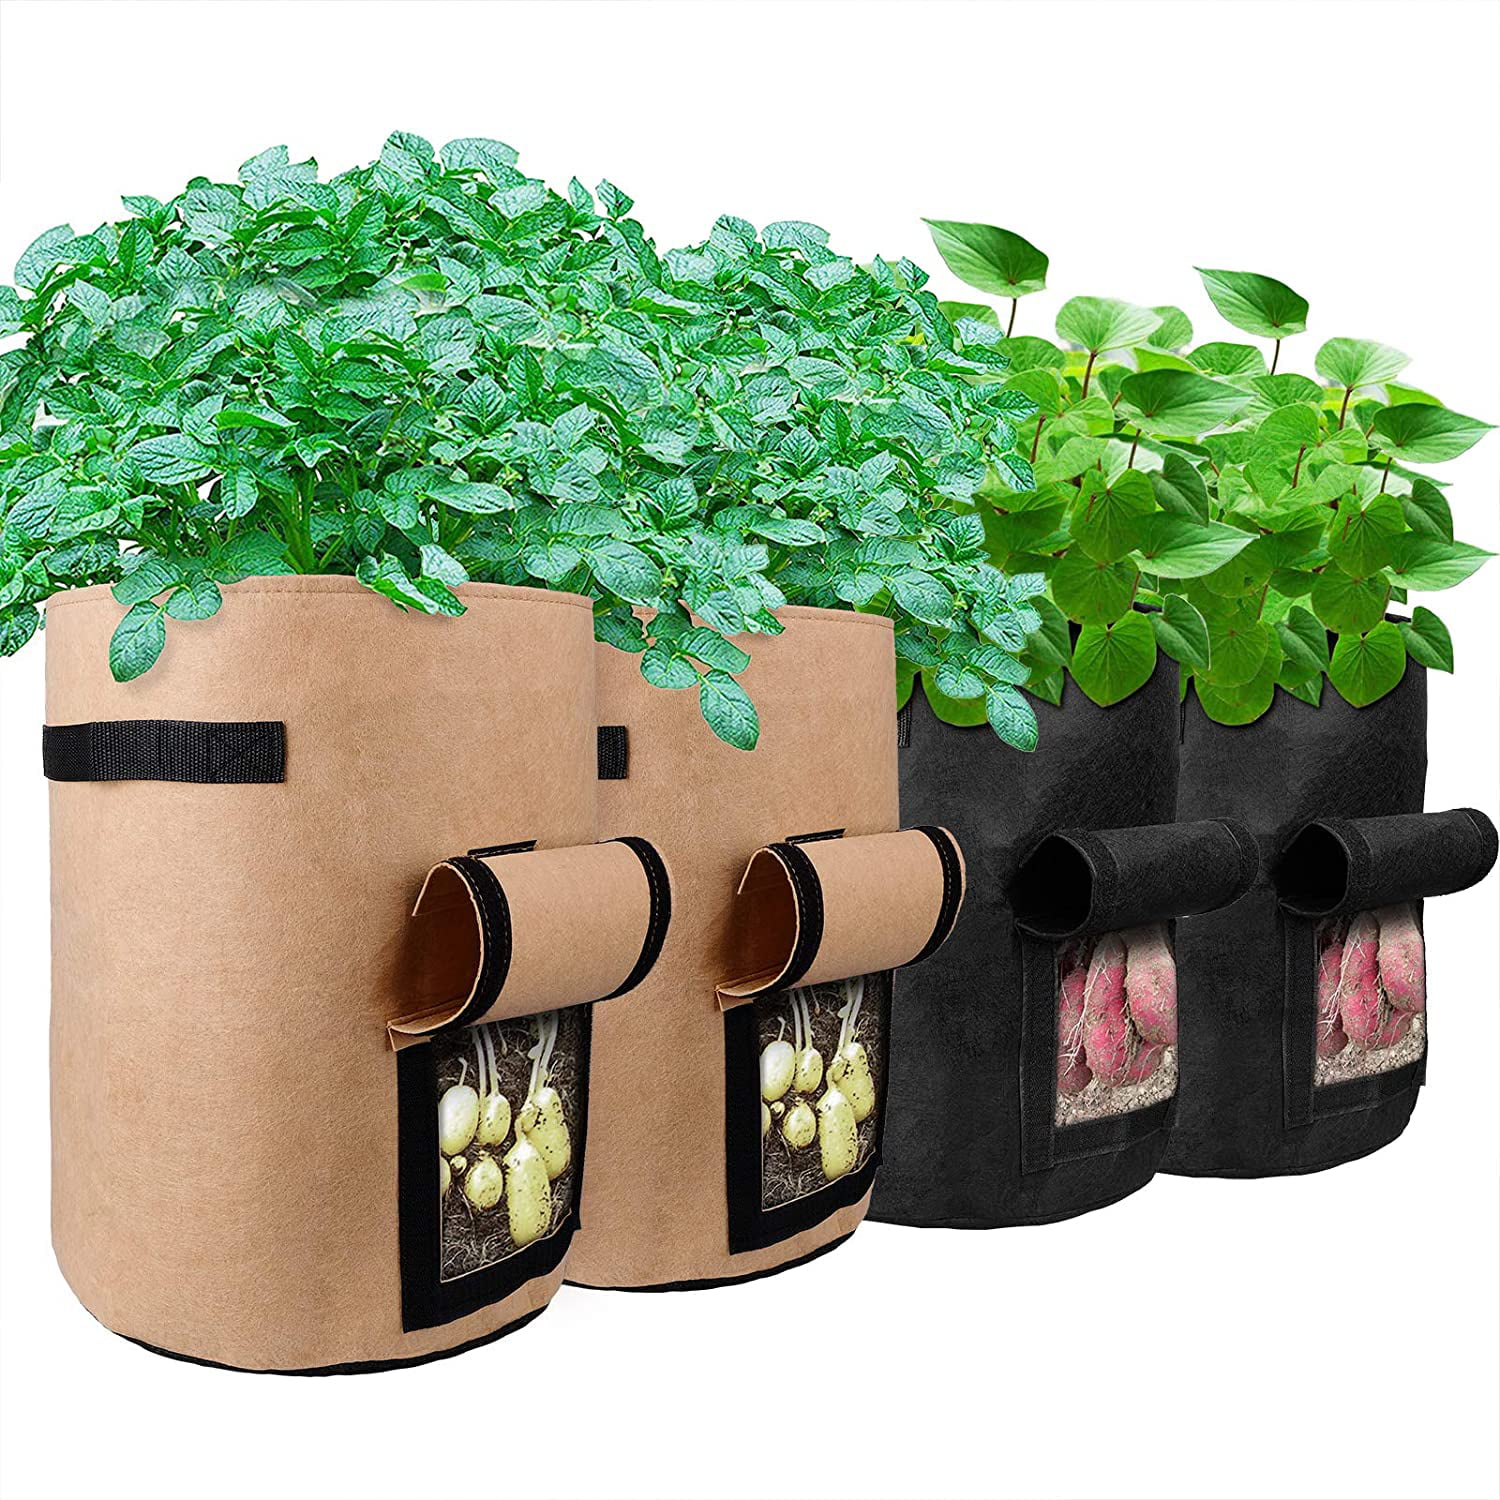 Green and Black Colour Pack Of 3 Breathable Garden Planter Growing Bags Vegetable Grow Bags with Access Flap and Carrying Handles 3PK Black 10 Gallon Bags